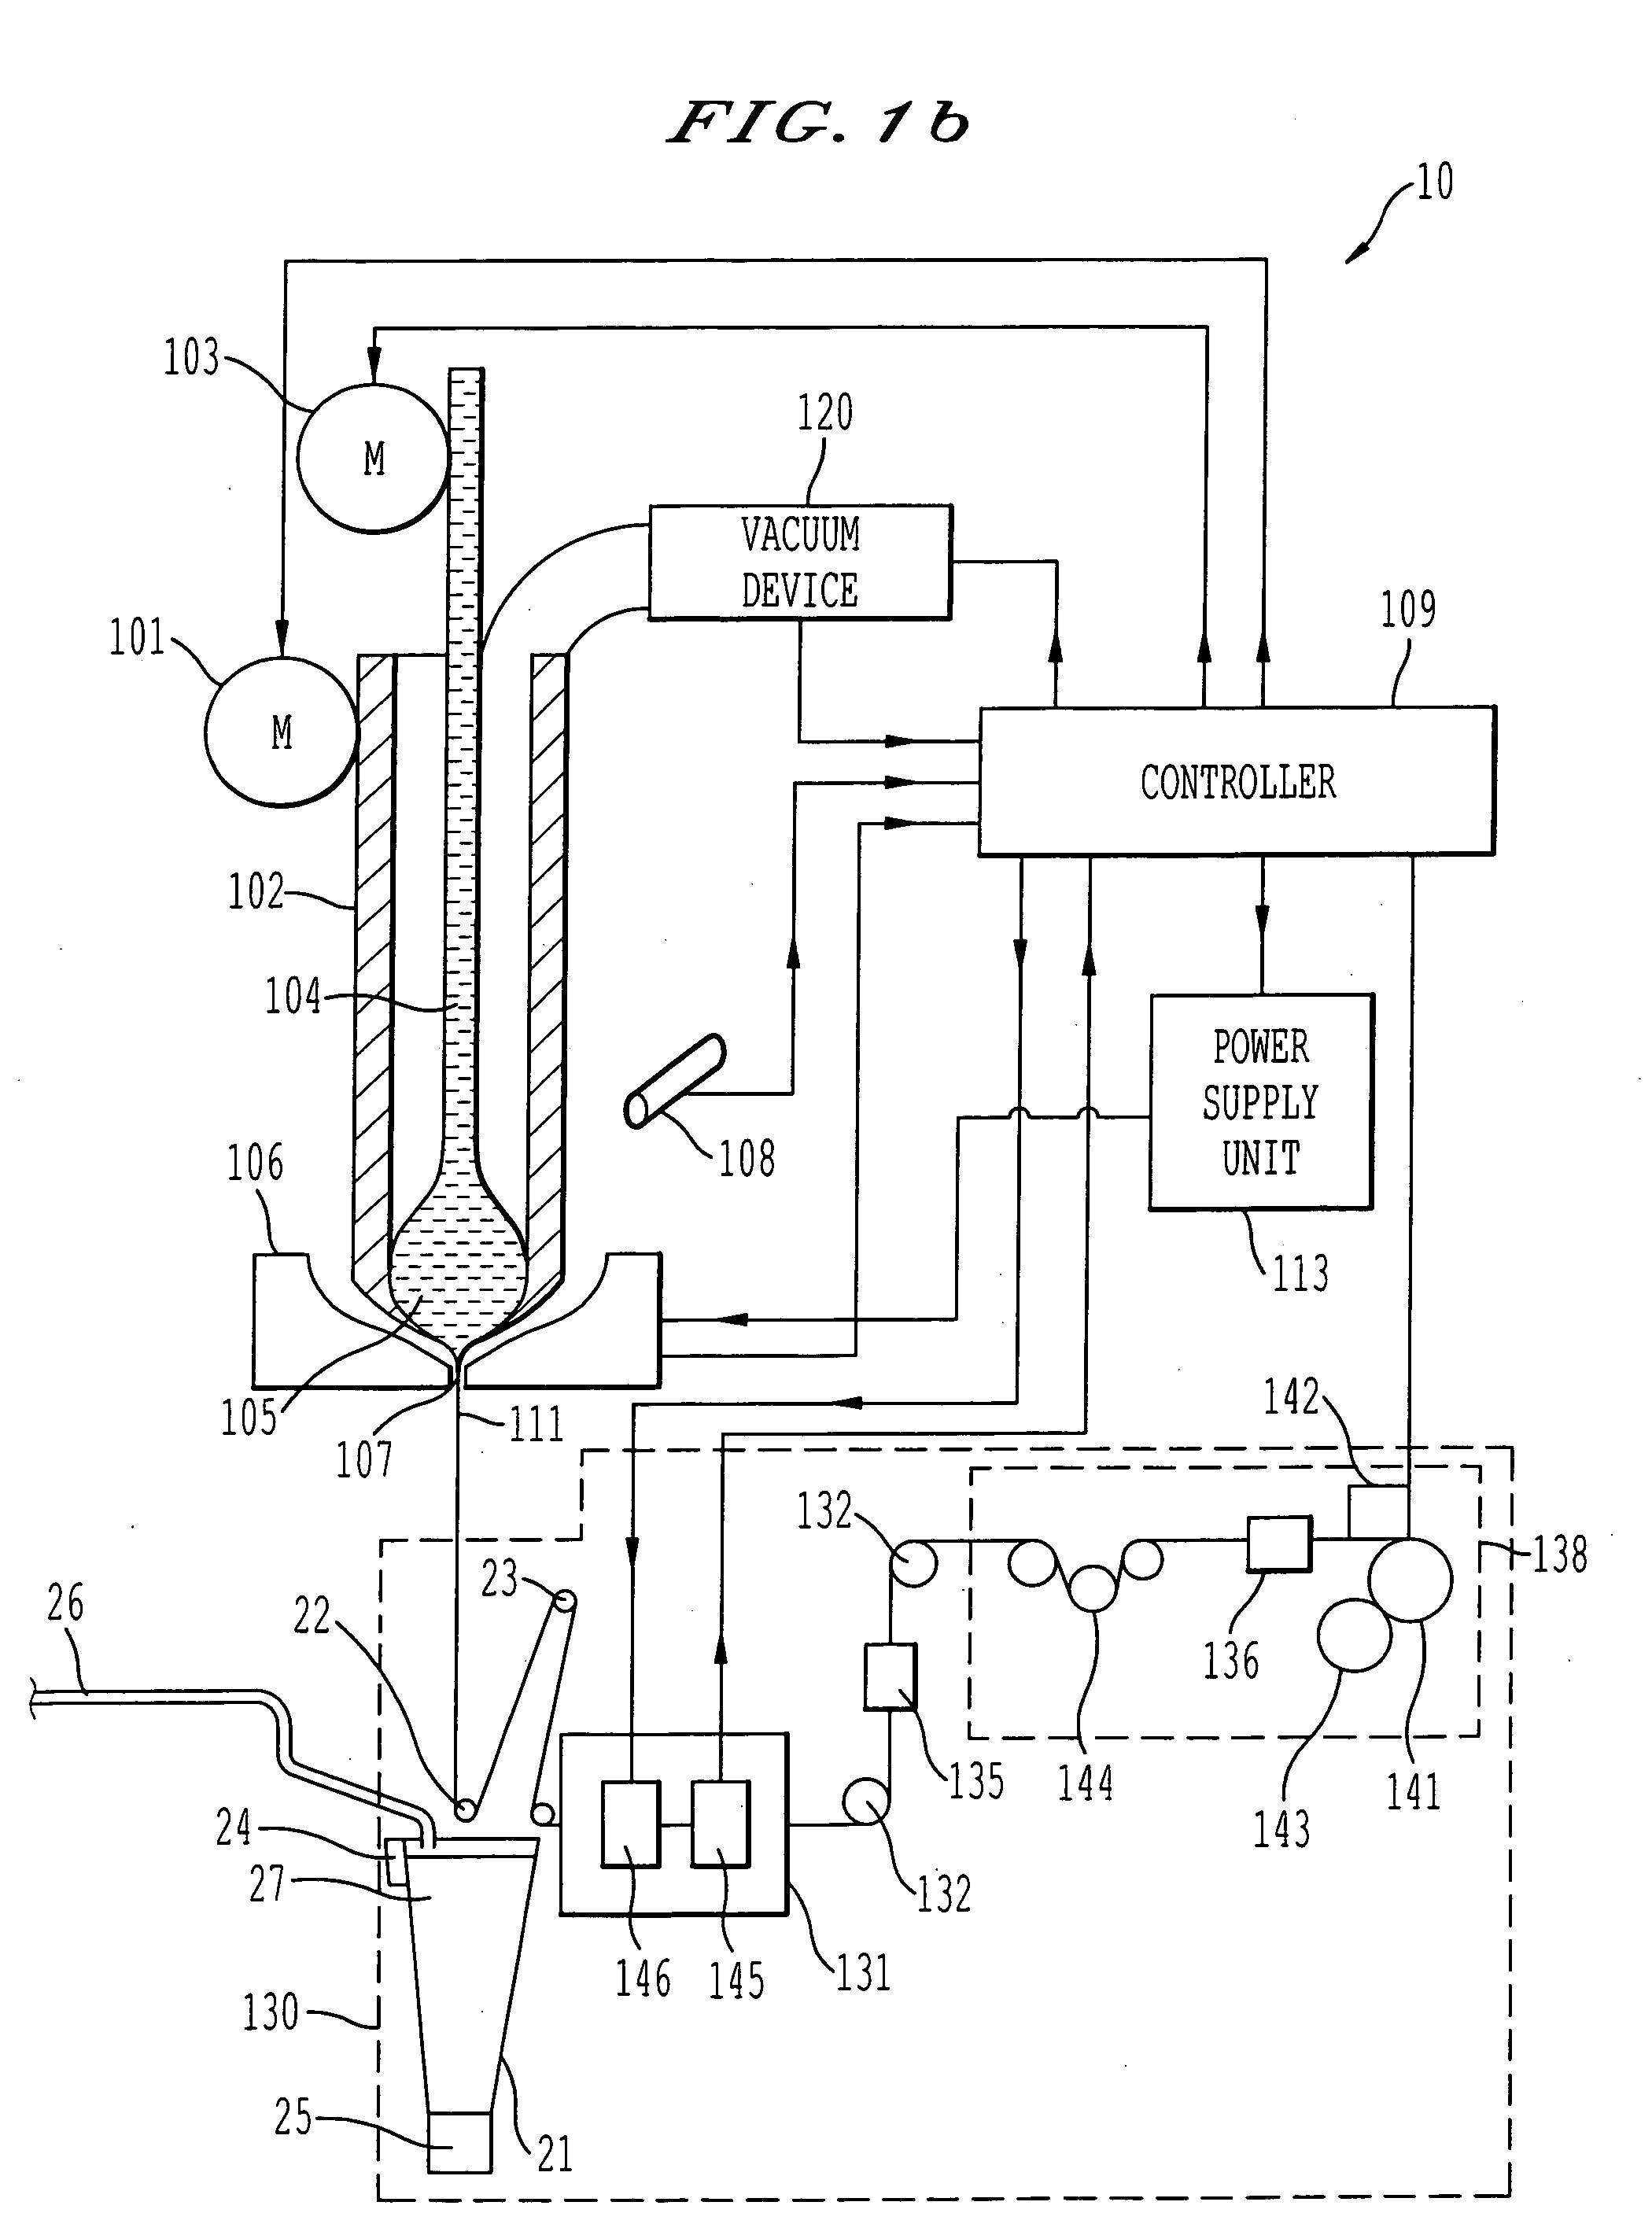 System and process for forming glass-coated microwires, including a cooling system and process